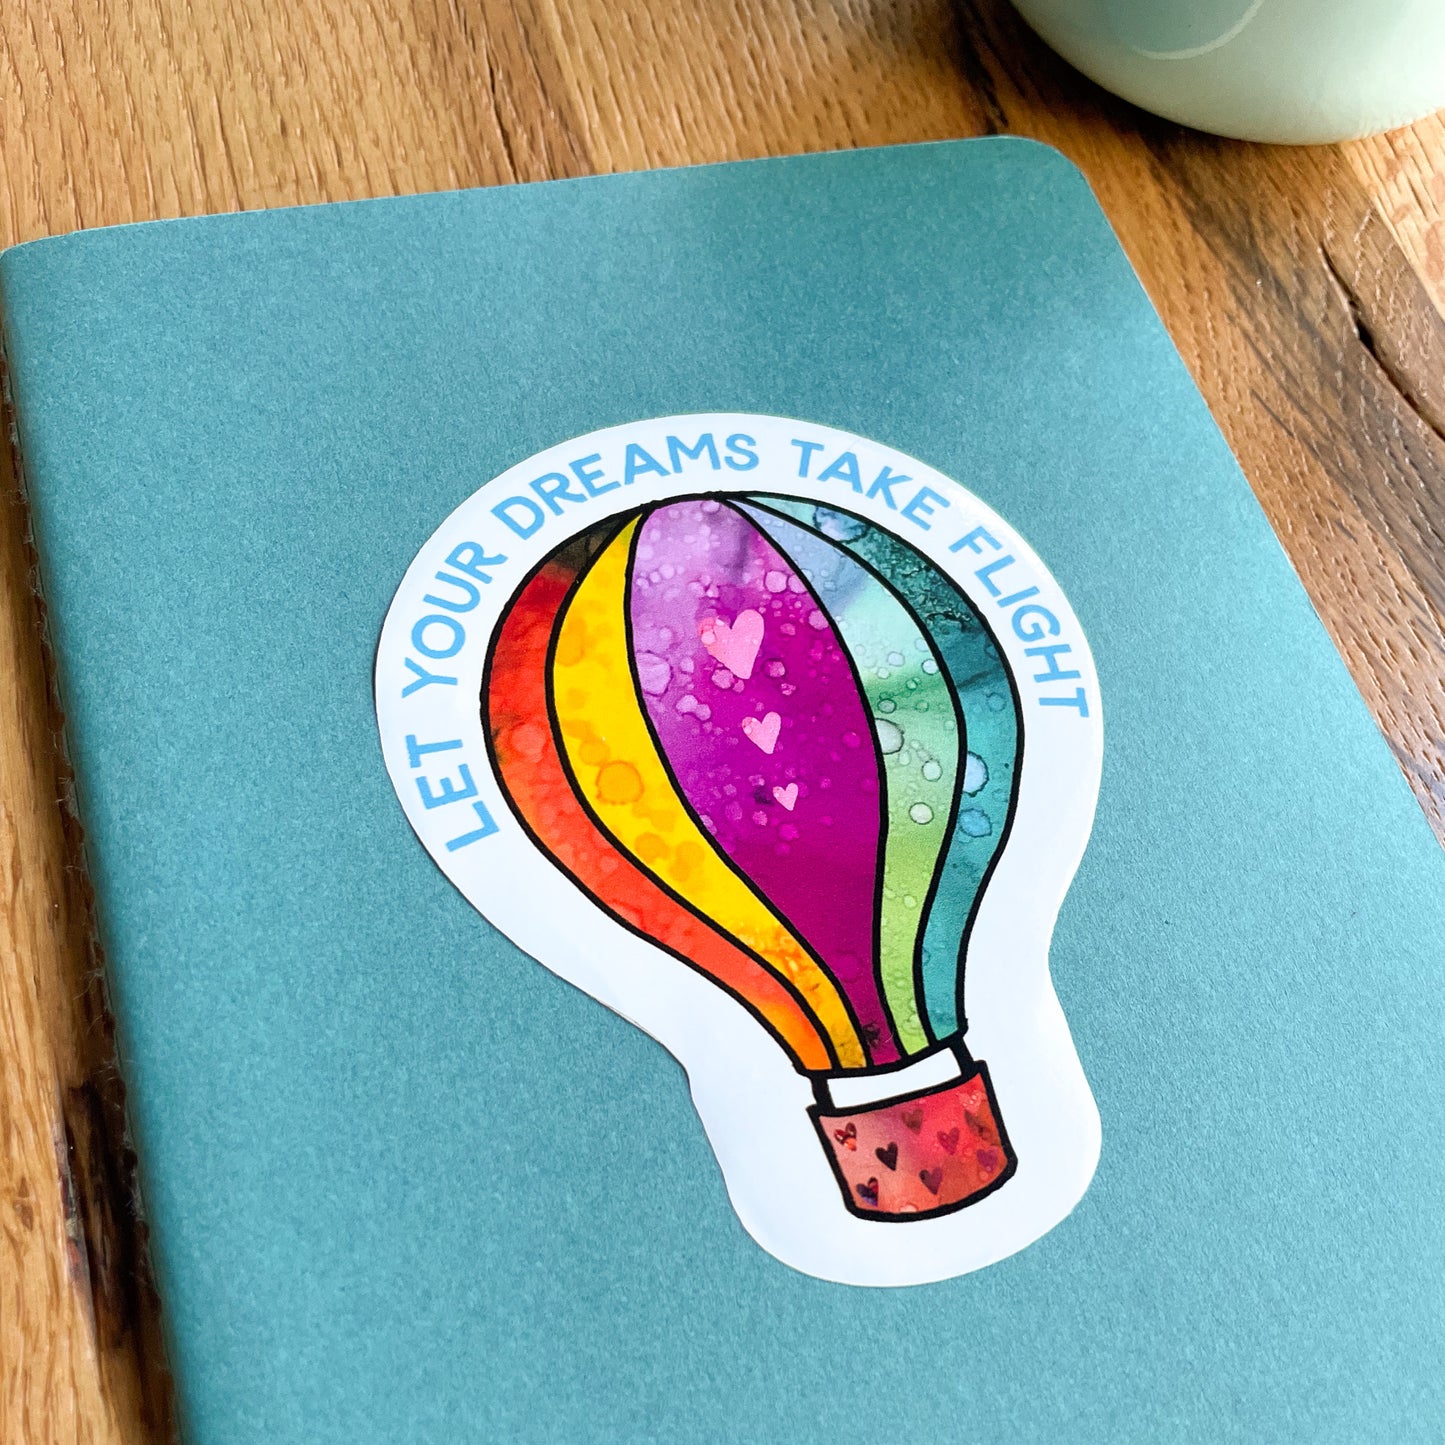 Let your dreams take flight with this vibrant hot air balloon vinyl sticker.